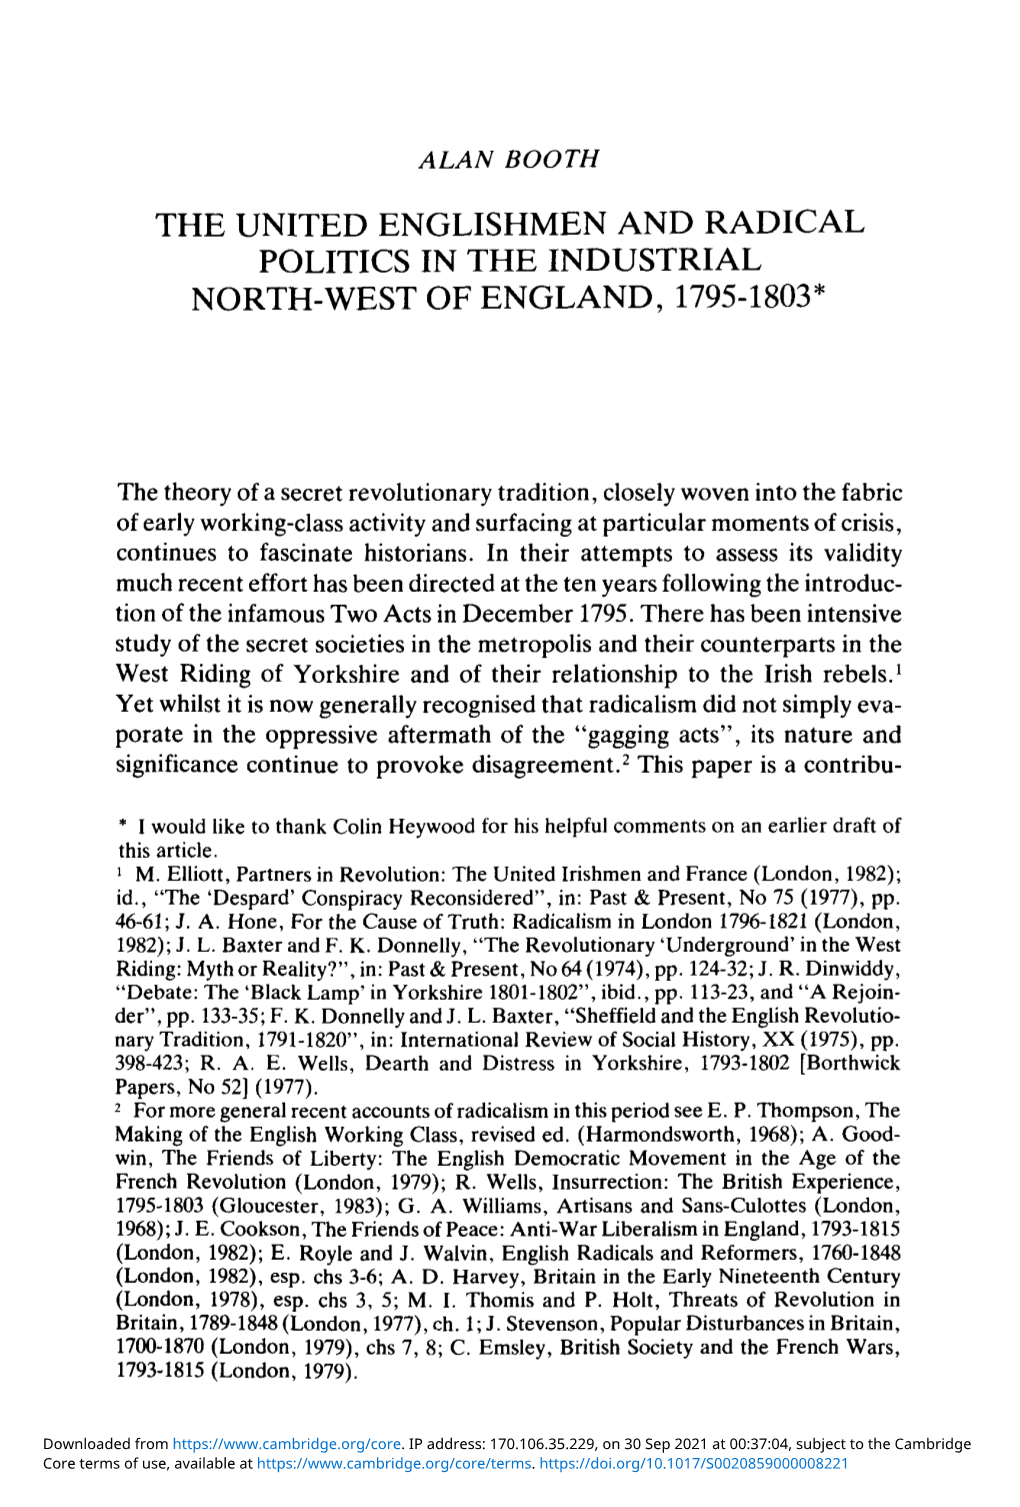 The United Englishmen and Radical Politics in the Industrial North-West of England, 1795-1803*